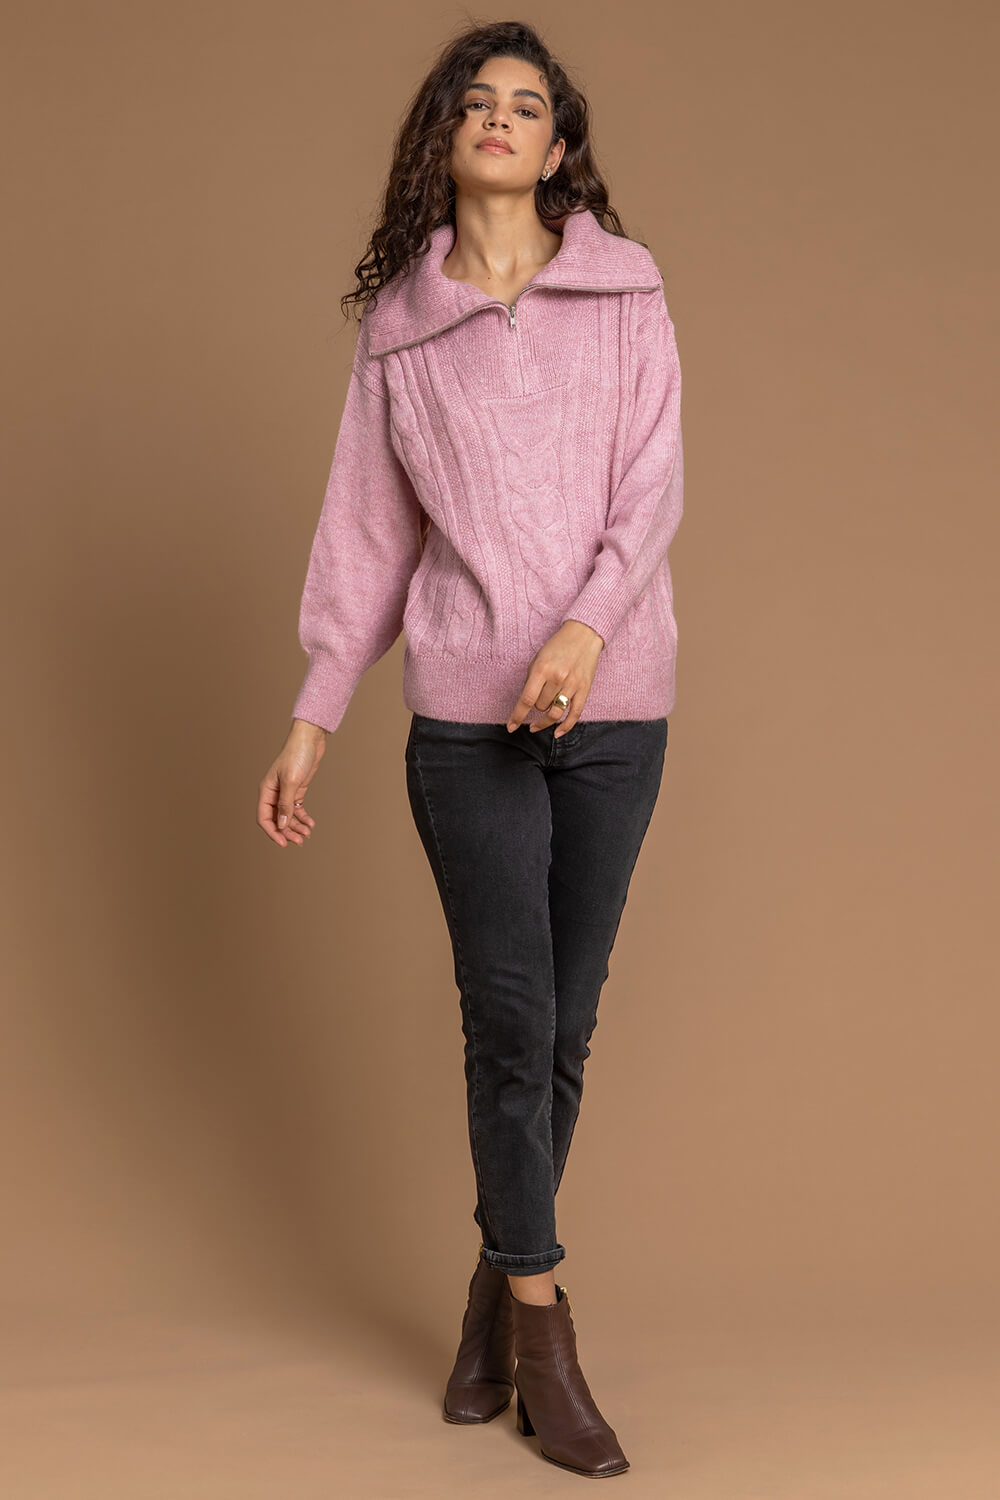 PINK Cable Knit Zip Collar Jumper, Image 3 of 5